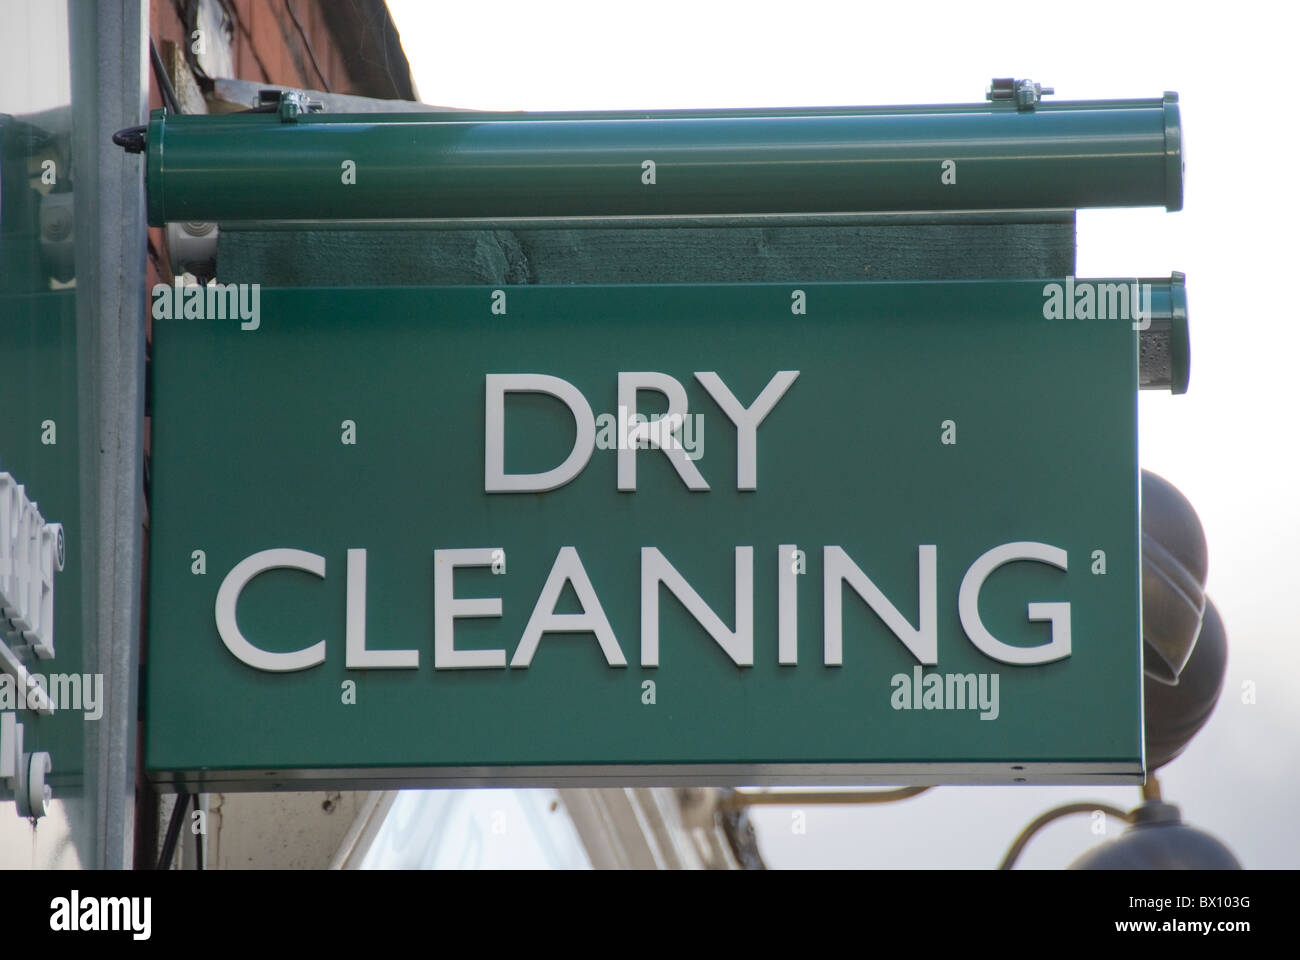 Dry cleaning sign, UK Stock Photo